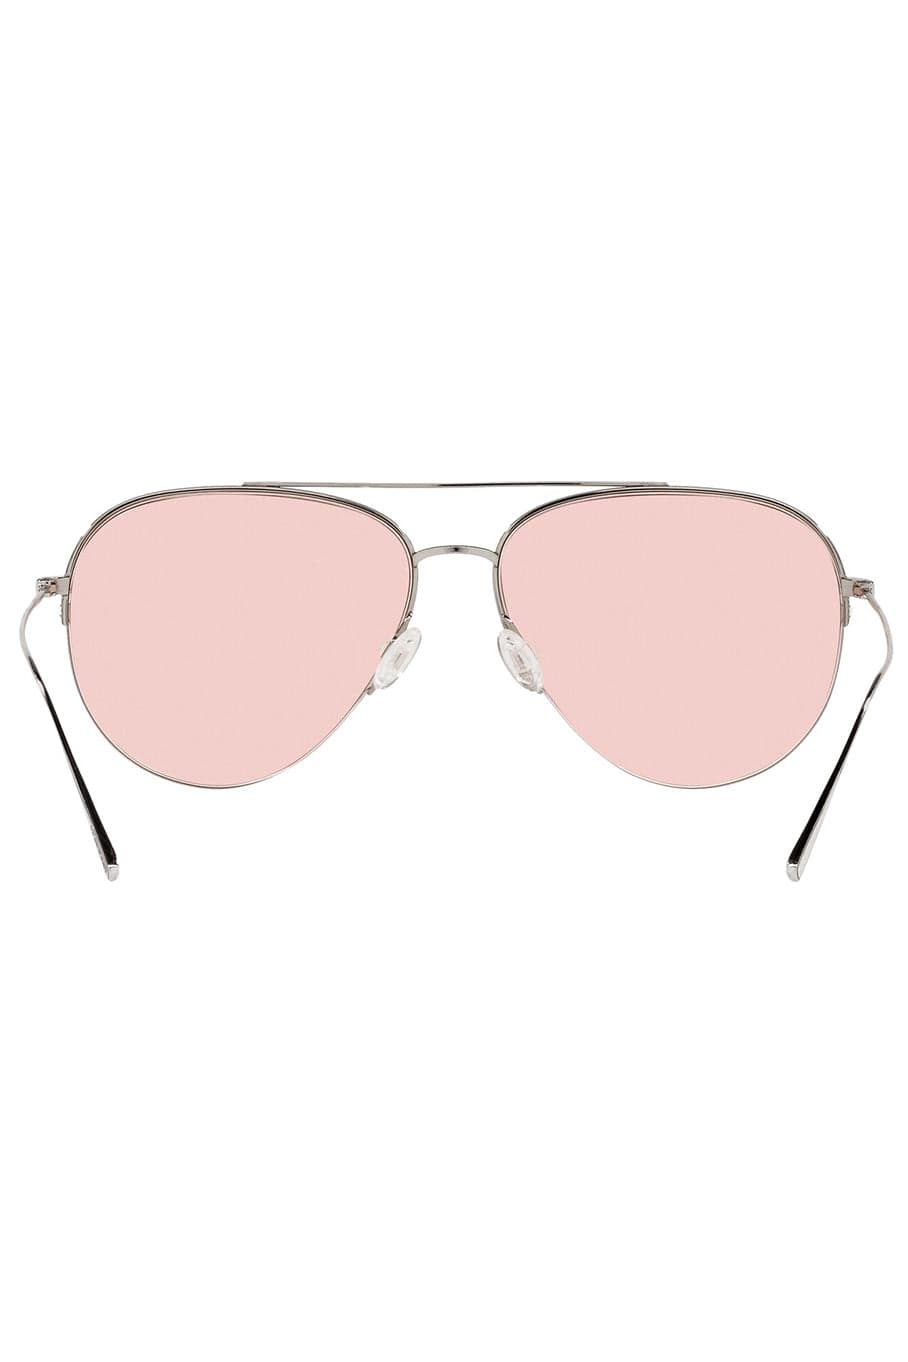 Cleamons Sunglasses - Silver Poppy – Marissa Collections